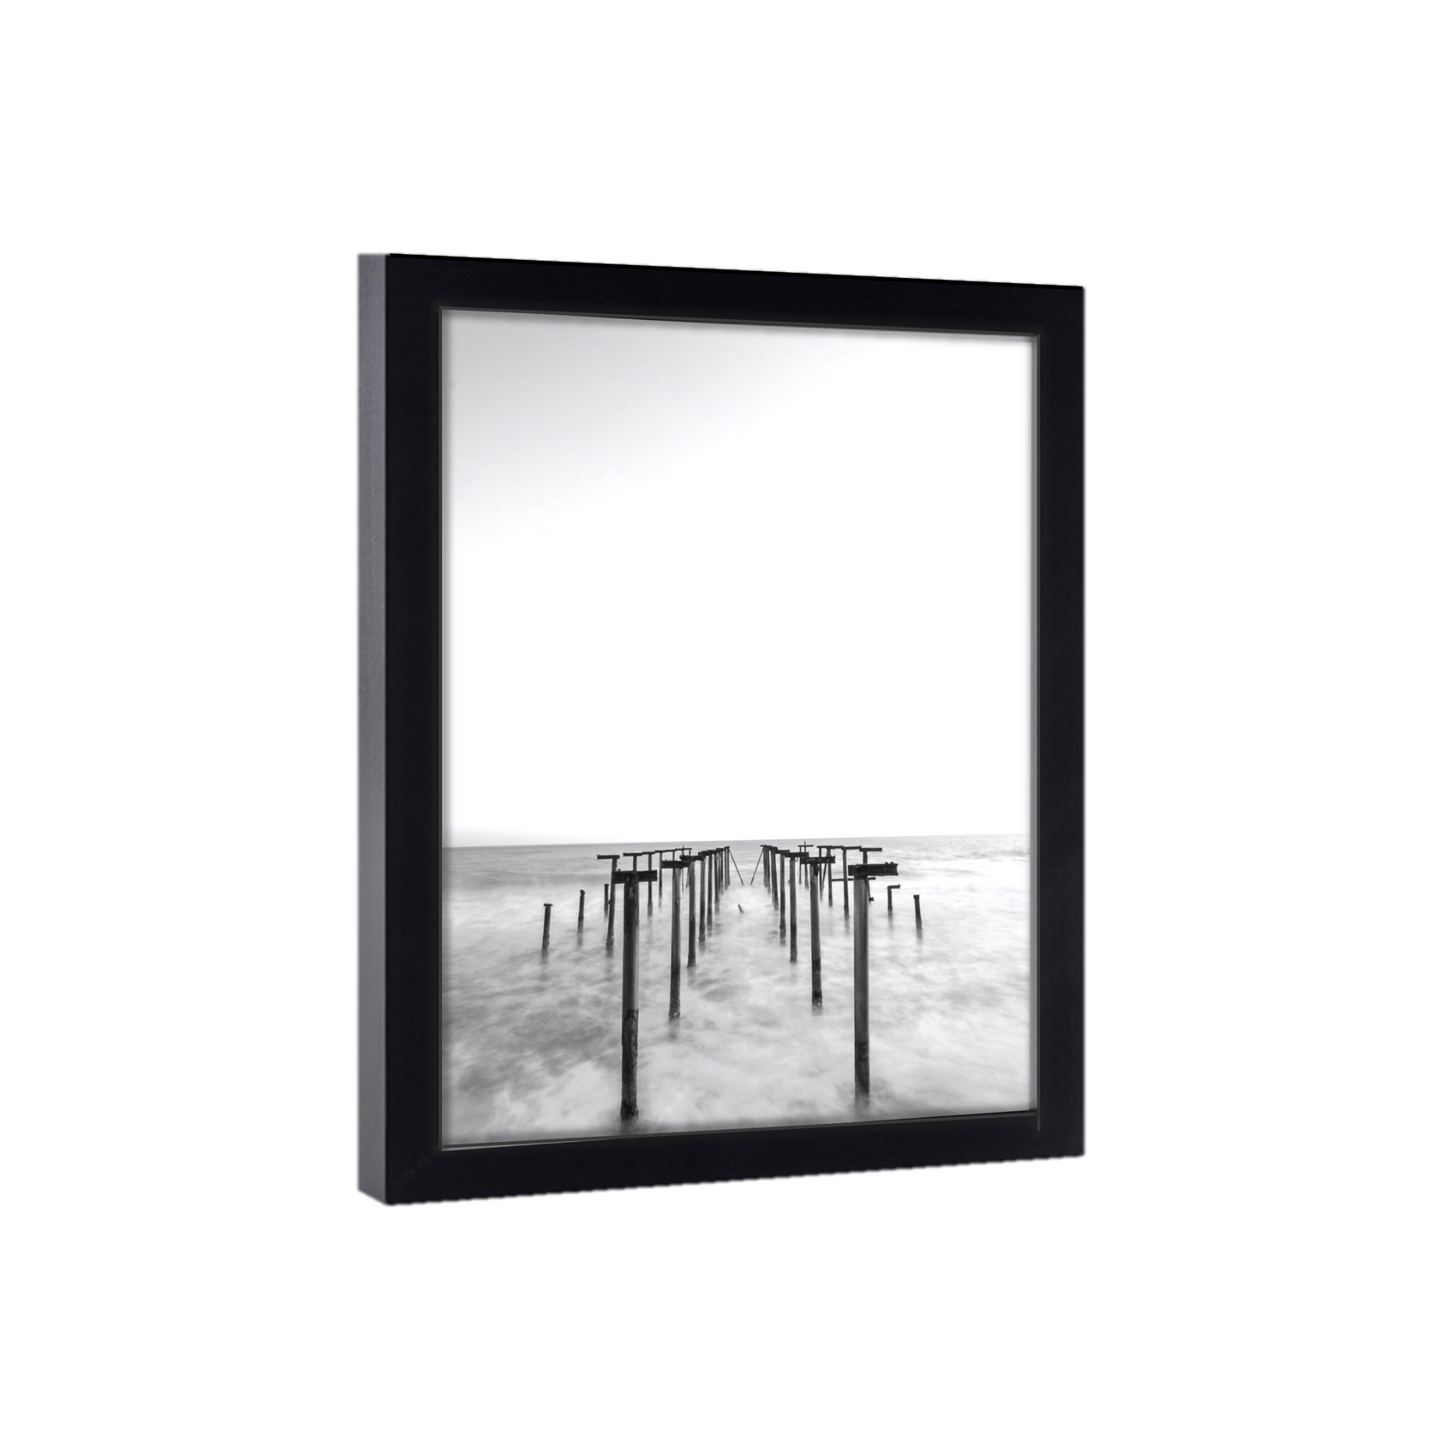 Gallery Wall 31x36 Picture Frame Black Wood 31x36  Poster Size